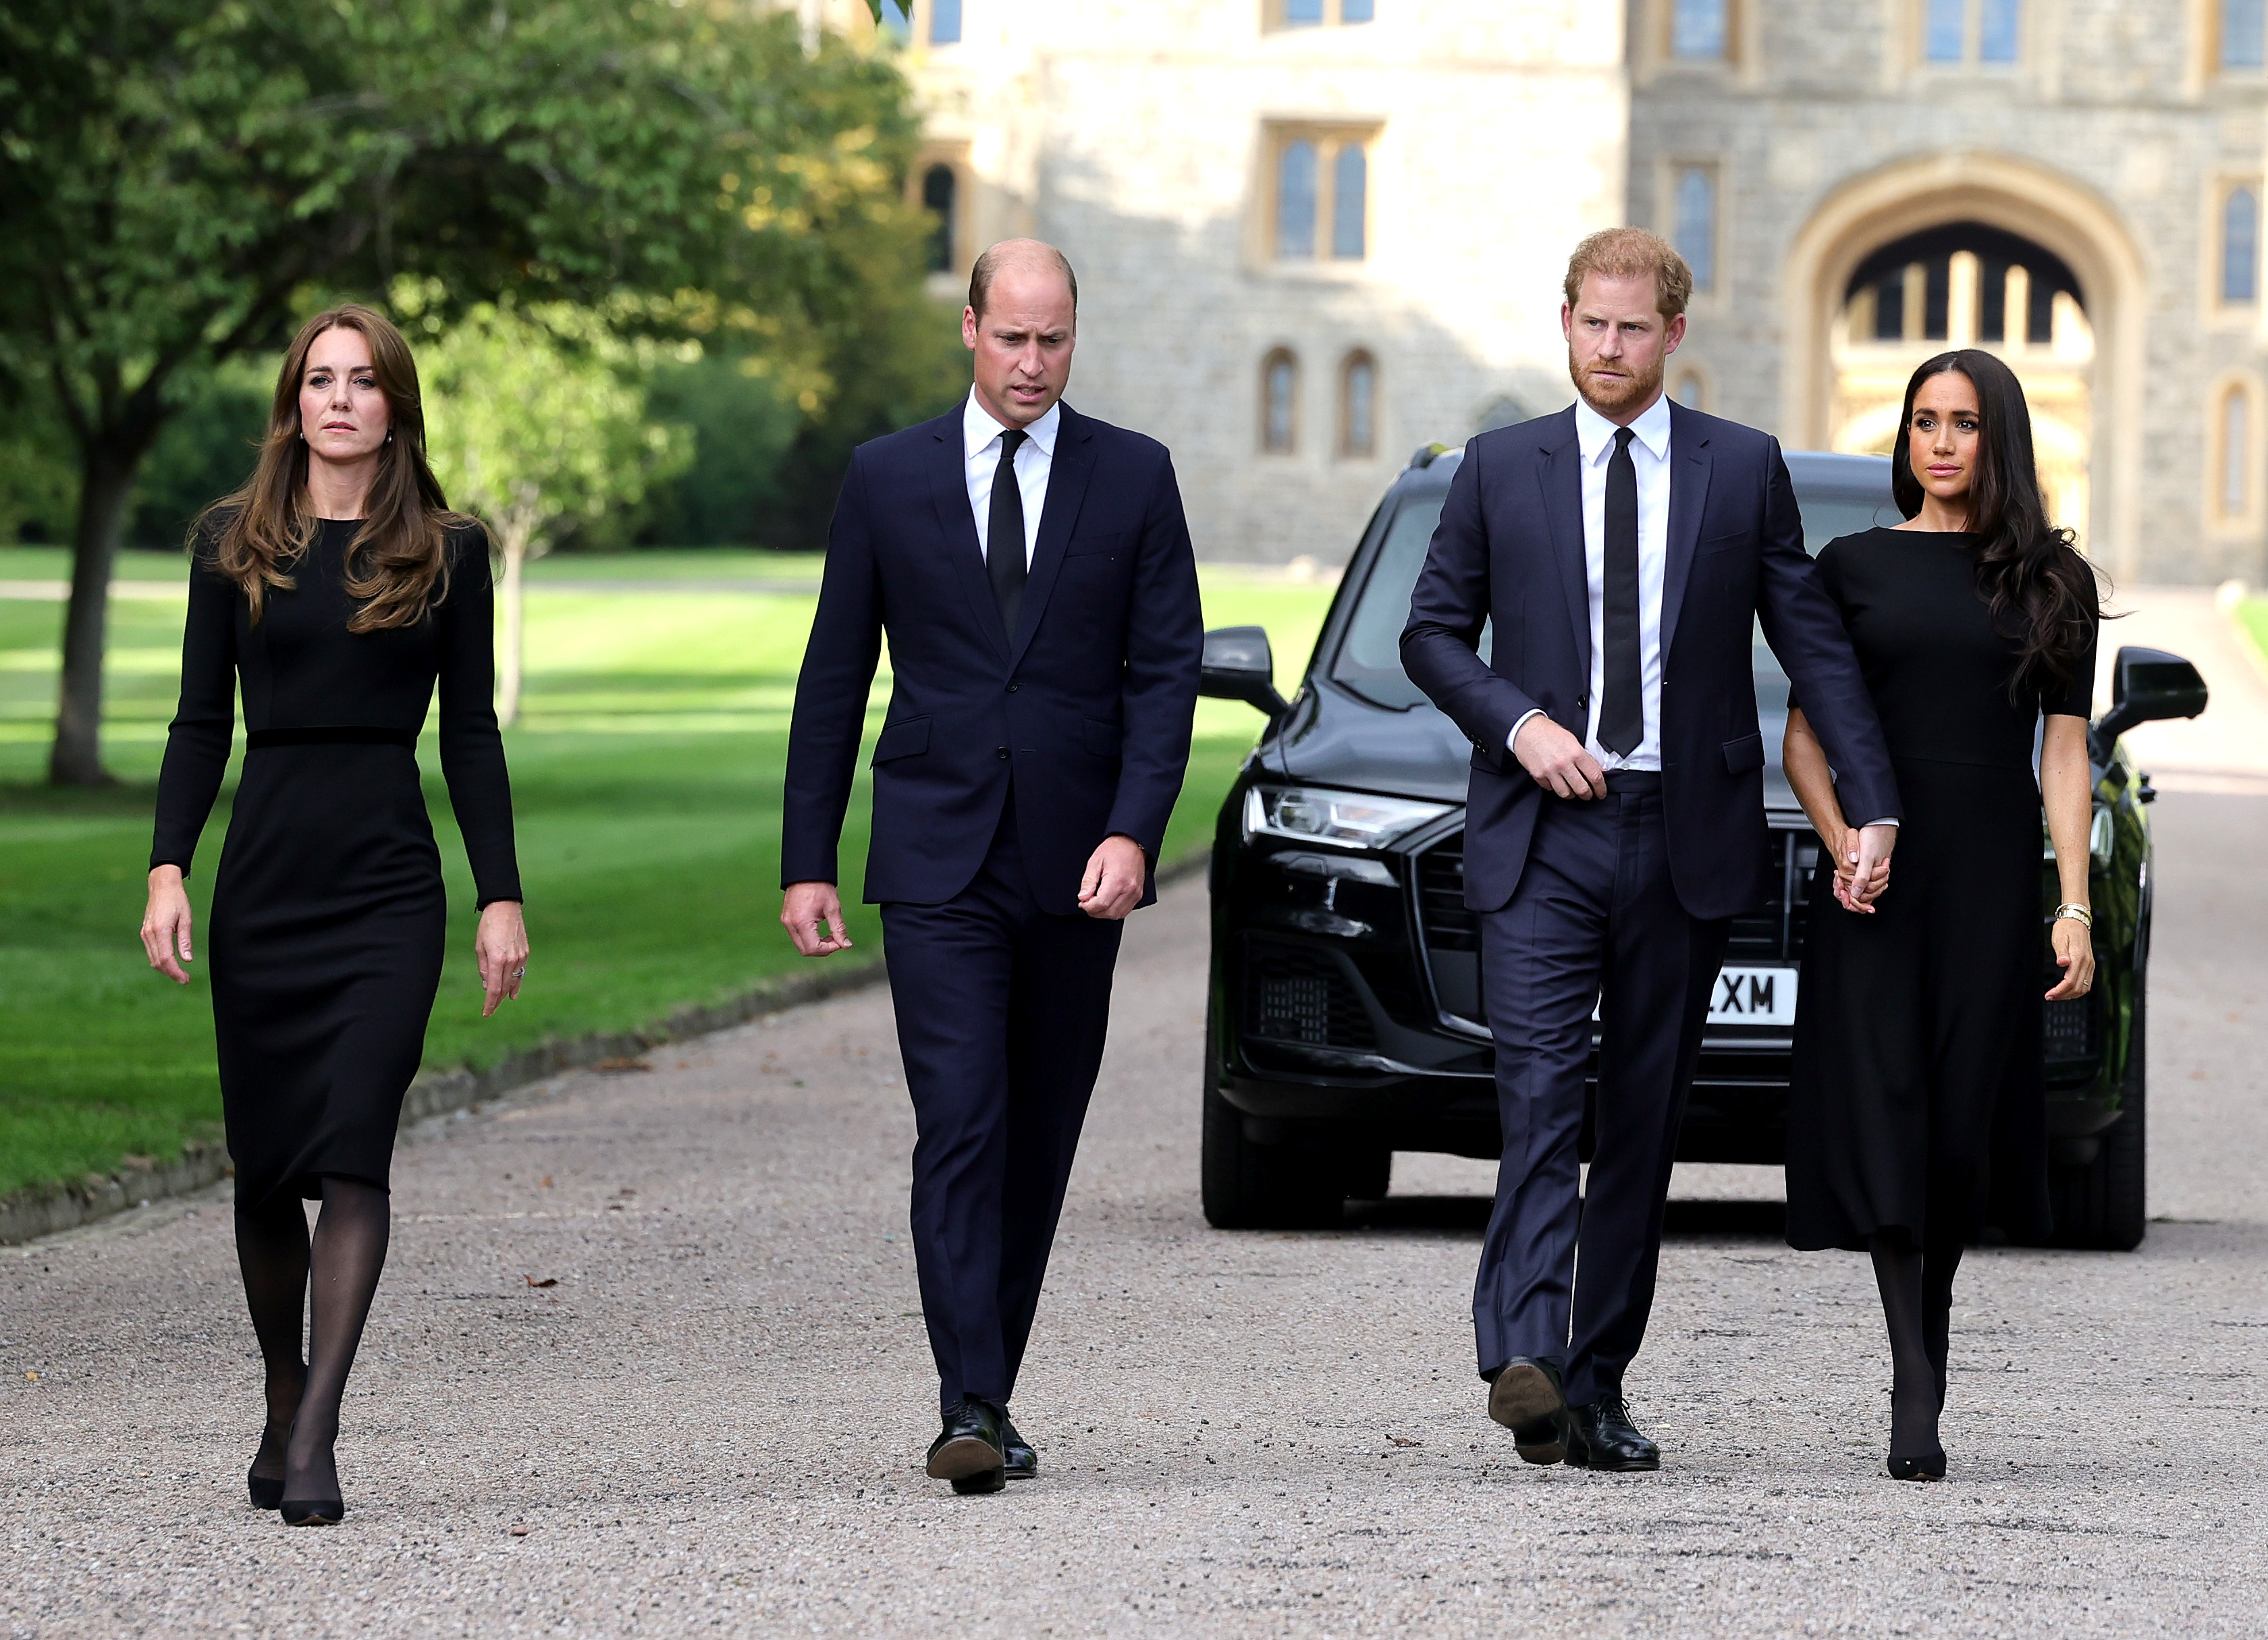 Princess Catherine, Prince William, Prince Harry and Meghan Markle on their way to view flowers and tributes to the late Queen Elizabeth II in Windsor, England on September 10, 2022 | Source: Getty Images